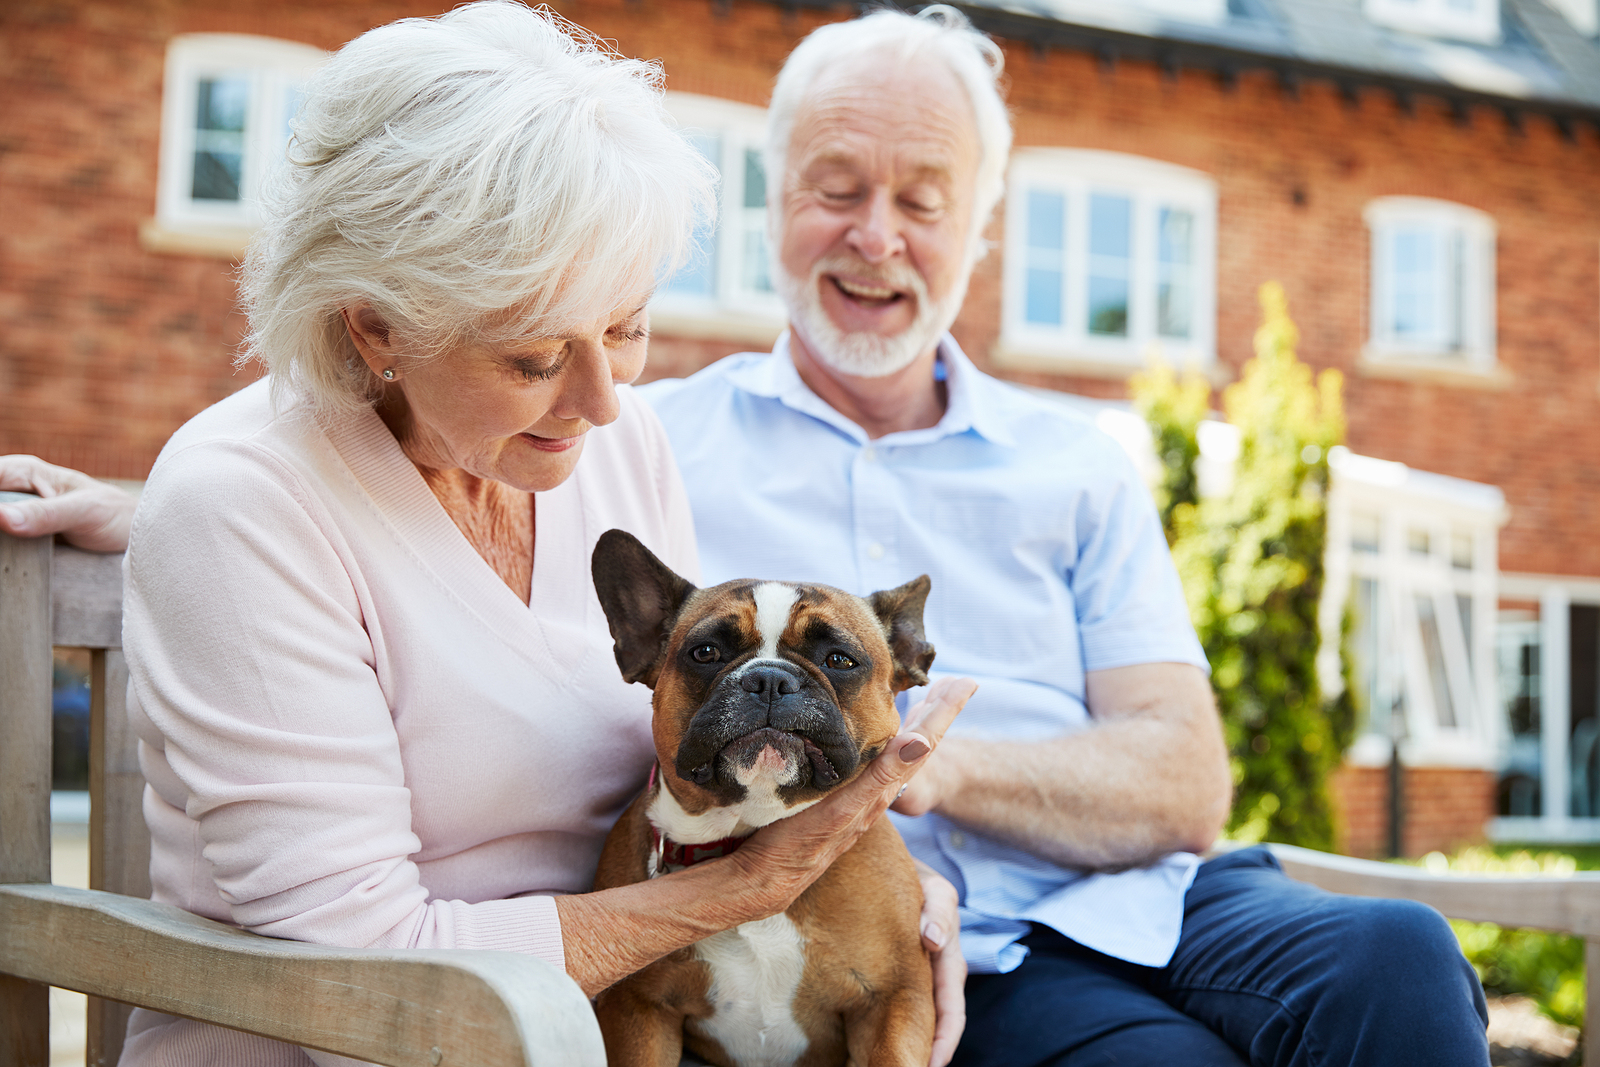 A senior couple sit on a bench outside and pet their small white and brown dog.